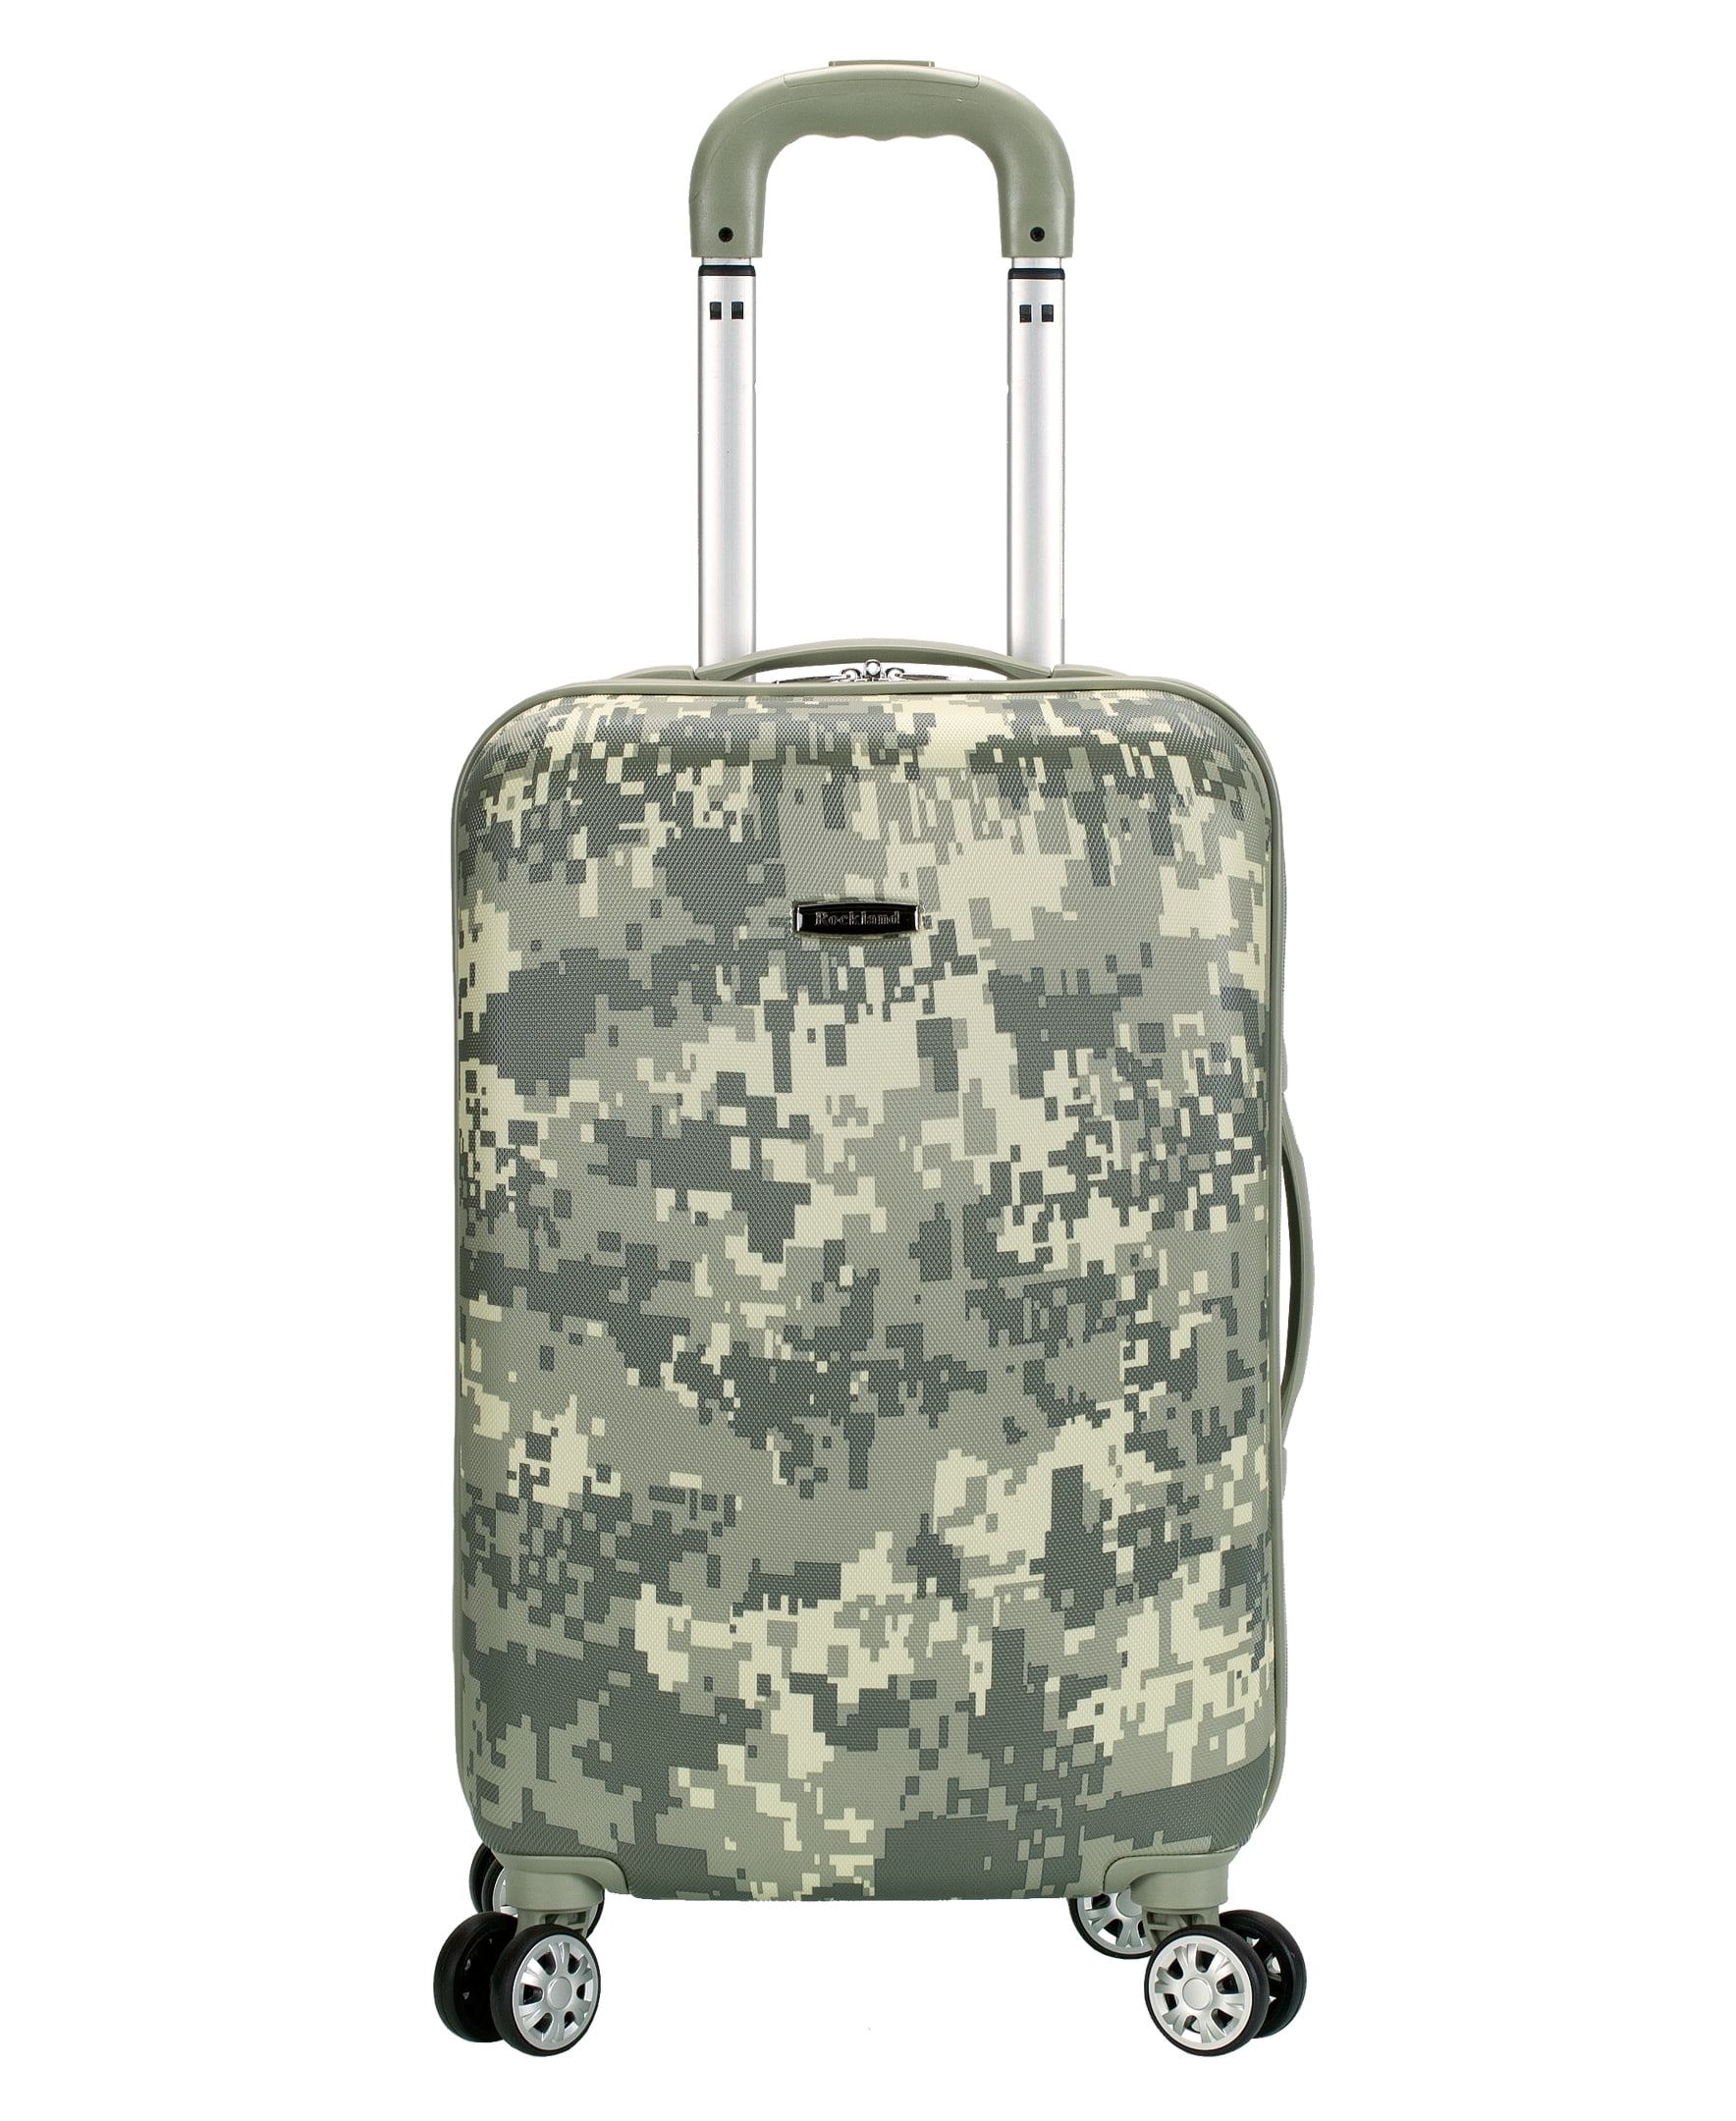 Nuki 020020 Front Accessible Luggage Lightweight Spinner, Camouflage  Green - 20 in. - Walmart.com